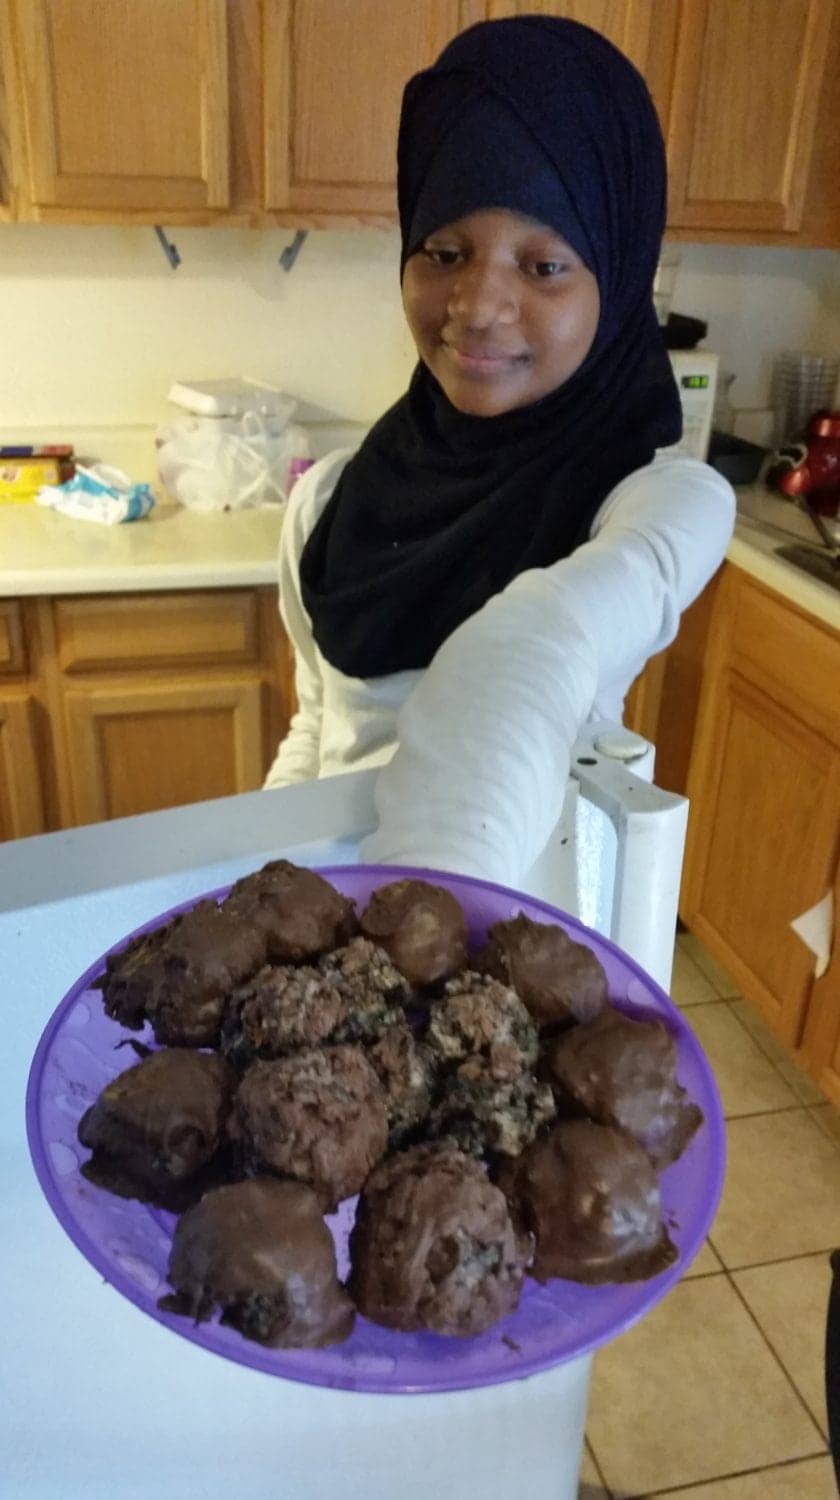 Najiyya-Al-Khalifa-makes-sweets-for-her-family, Abdul-Haqq Khalifah turns sadness from the passing of his teenage daughter into fundraising for a cause, Culture Currents 